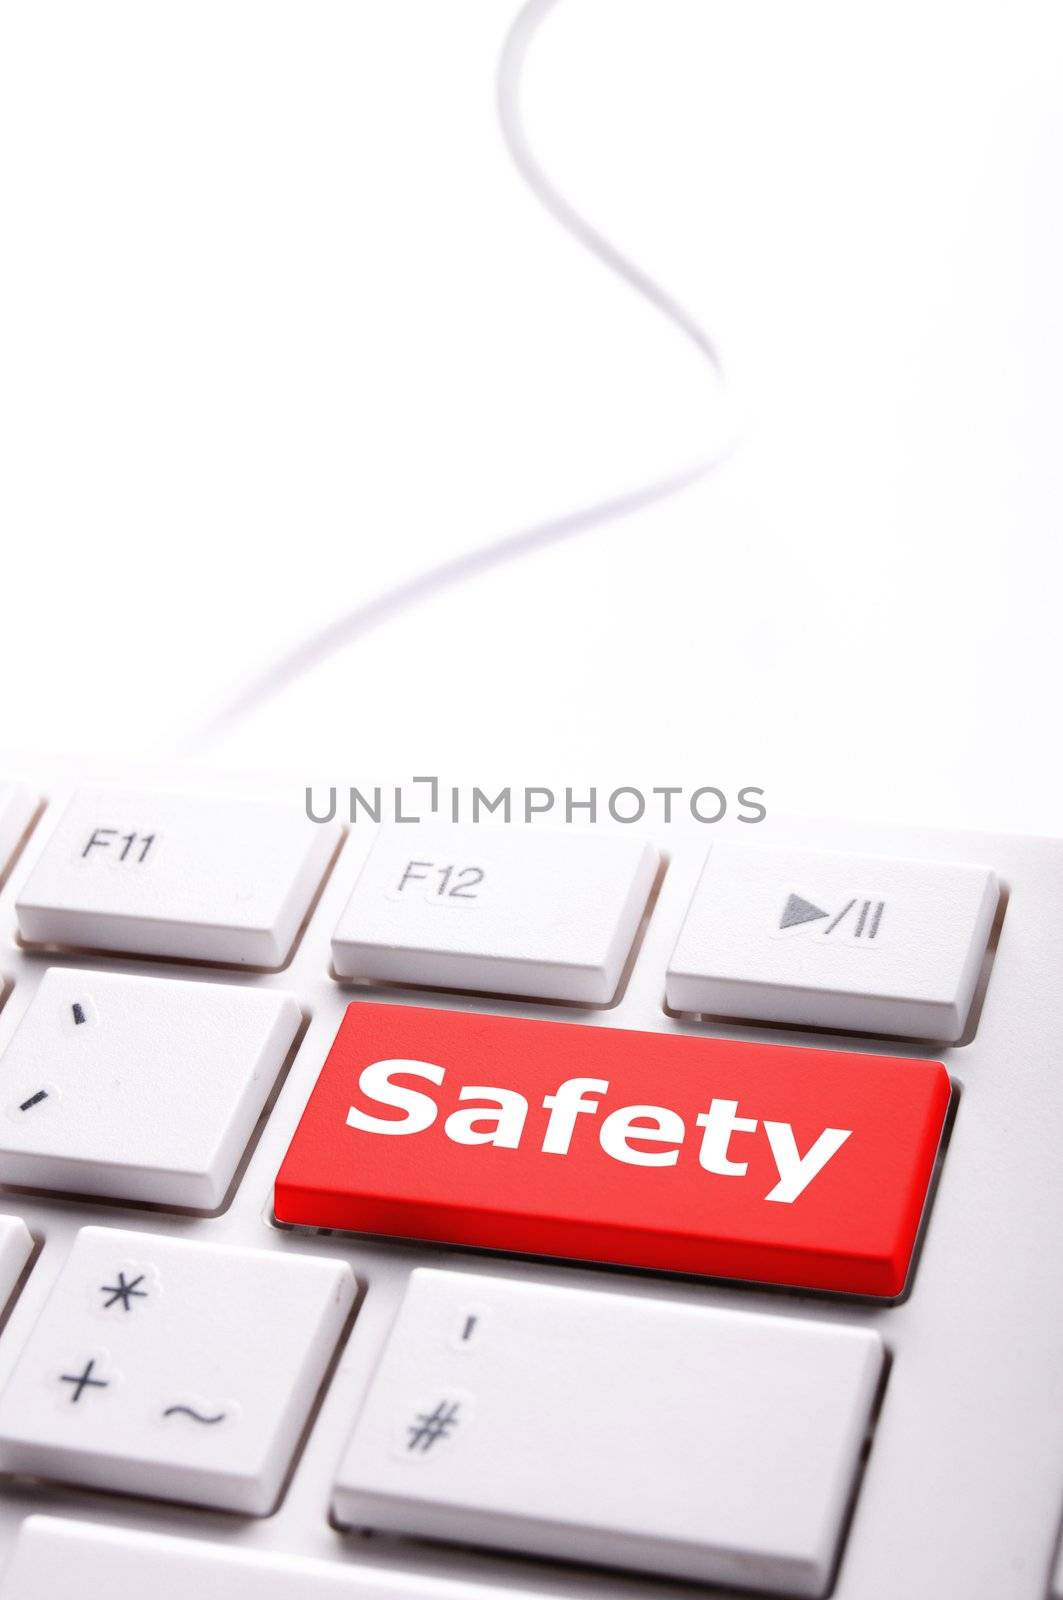 safety first on computer key showing security concept